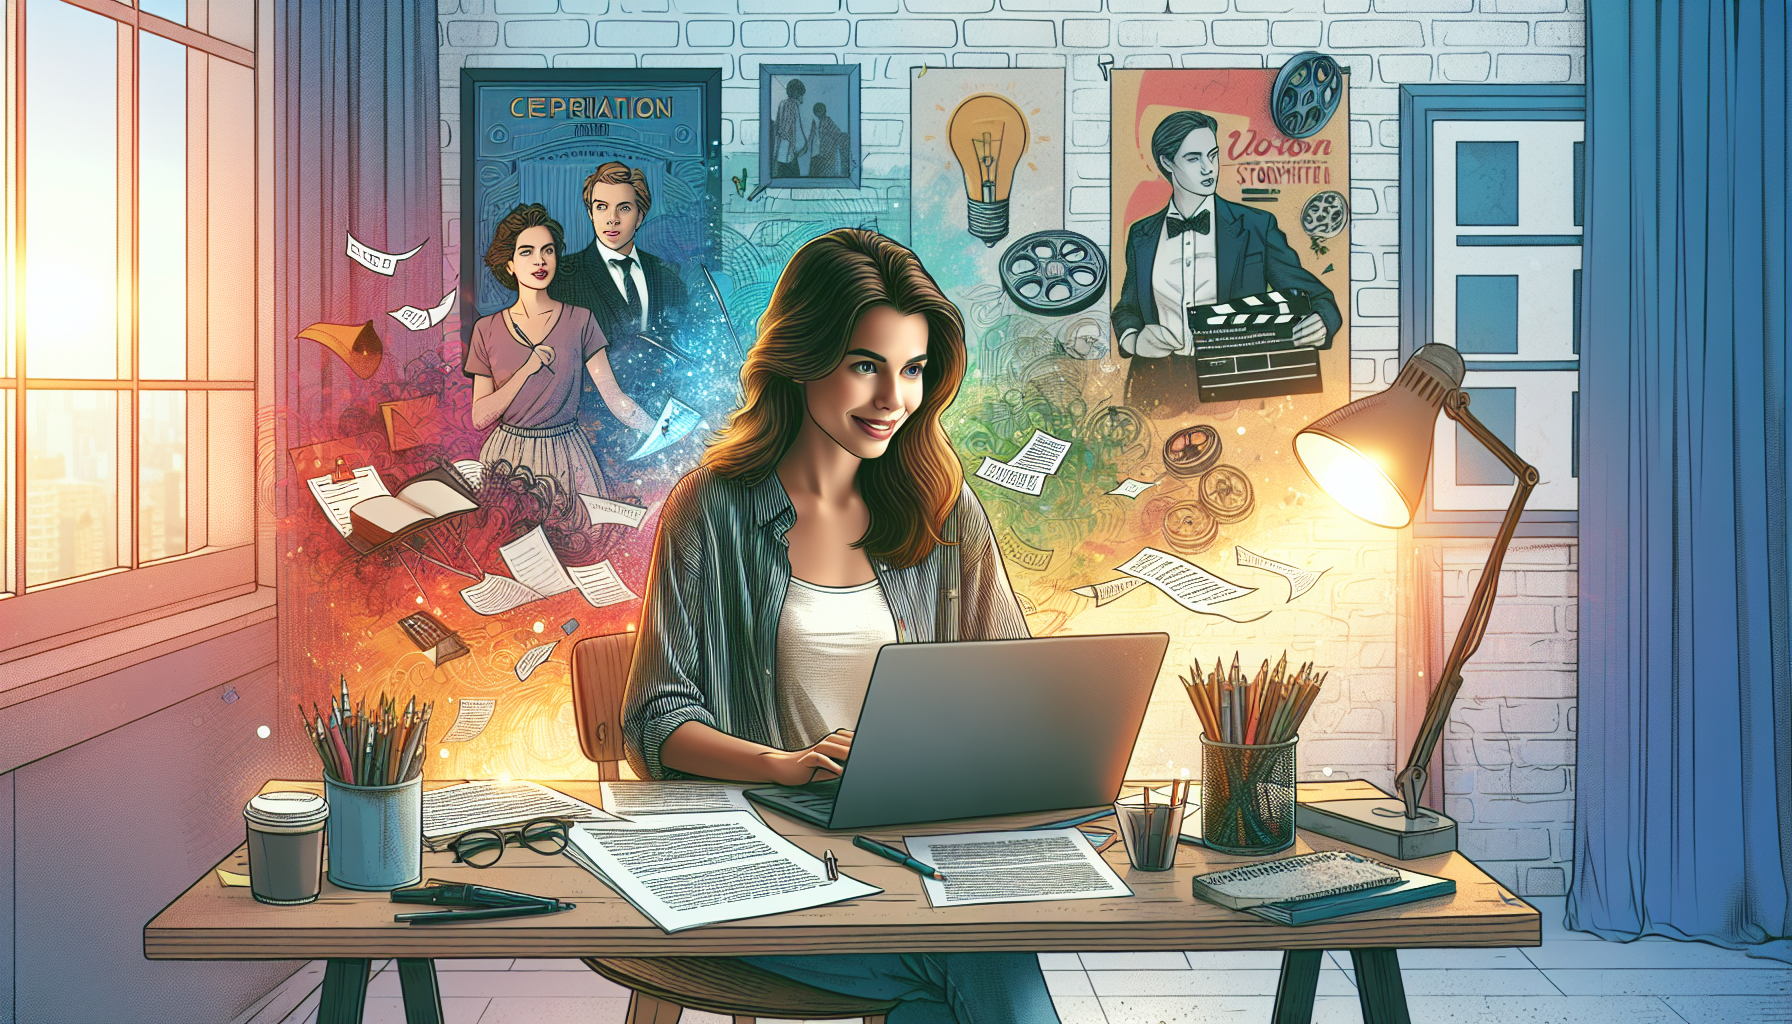 Create an engaging and vibrant illustration of a young, enthusiastic screenwriter sitting at a desk cluttered with scripts, notes, and a laptop. The background features motivational movie posters and a storyboard pinned to the wall. The room is bathed in warm light, creating a cozy atmosphere that inspires creativity.